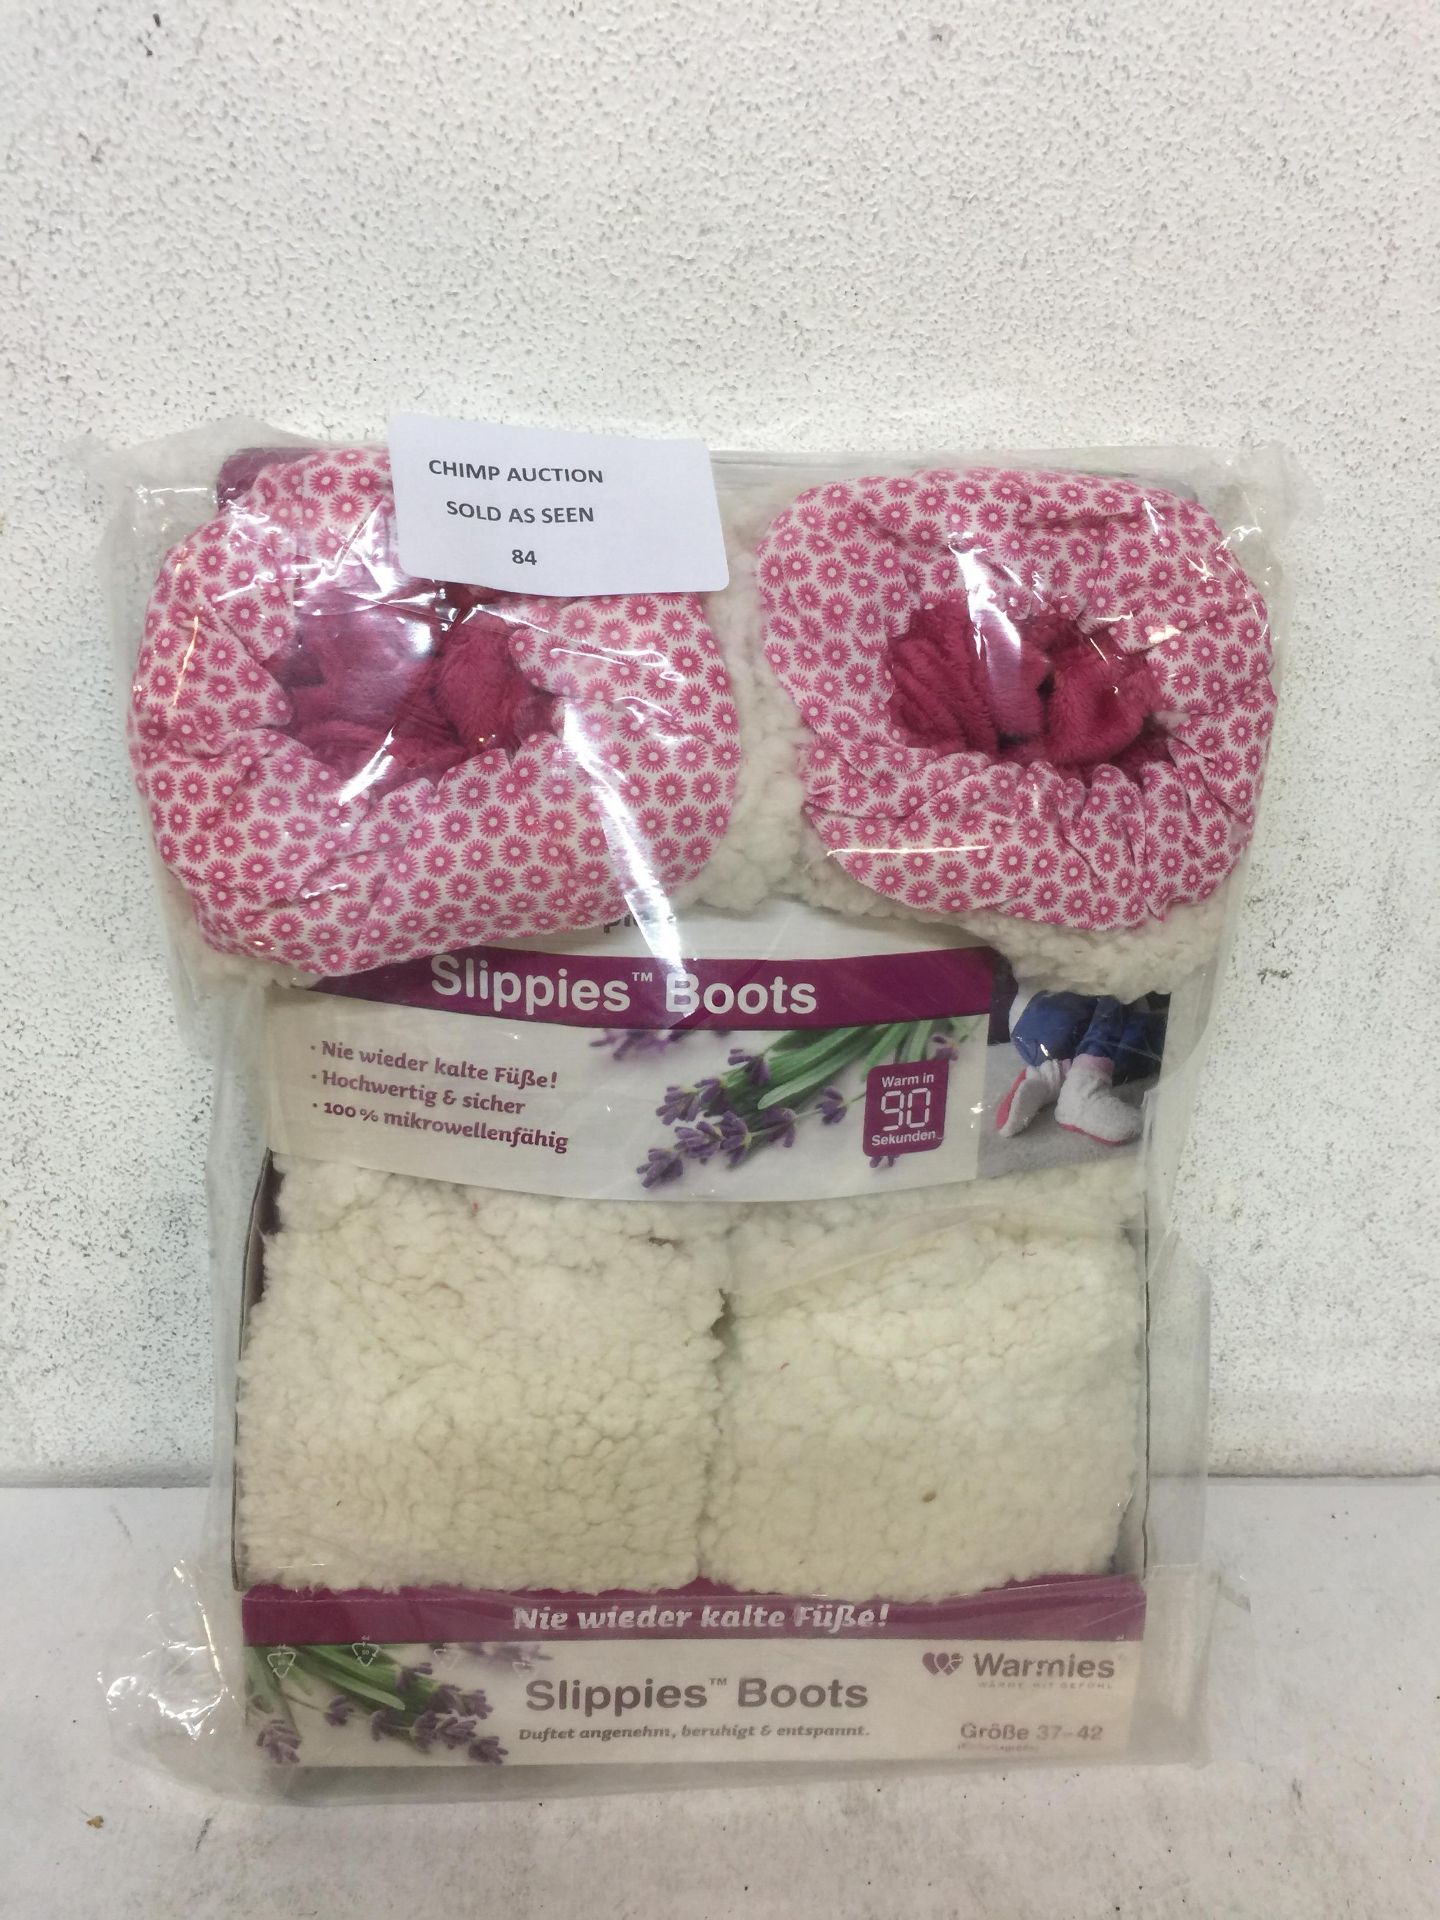 BRAND NEW Slippers Boots Removable Lavender Fragrance RRP £39.99.